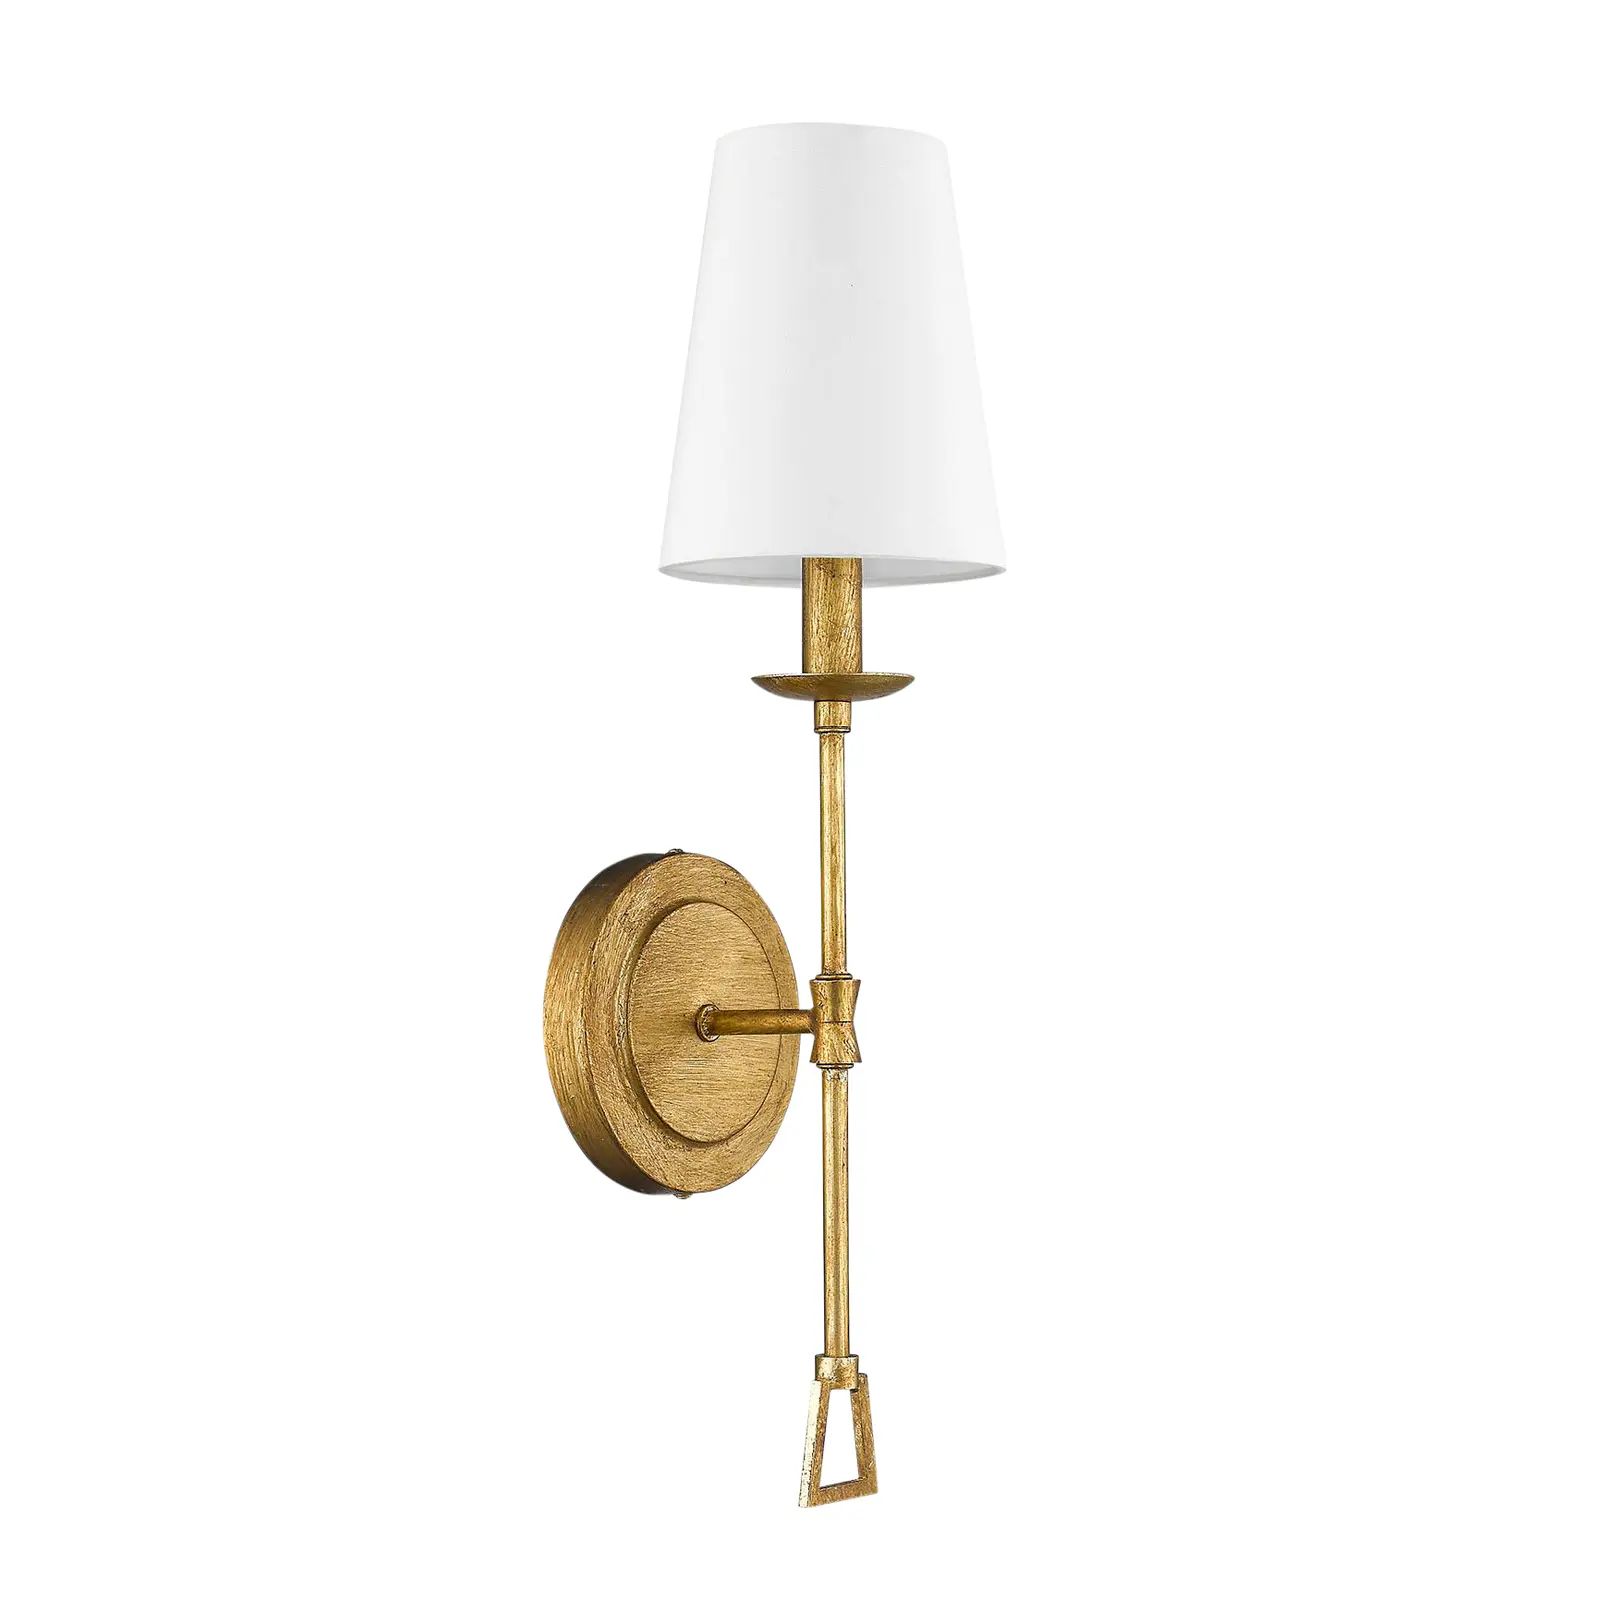 Ponce City 1 Light Sconce, Gilded Gold | Chairish